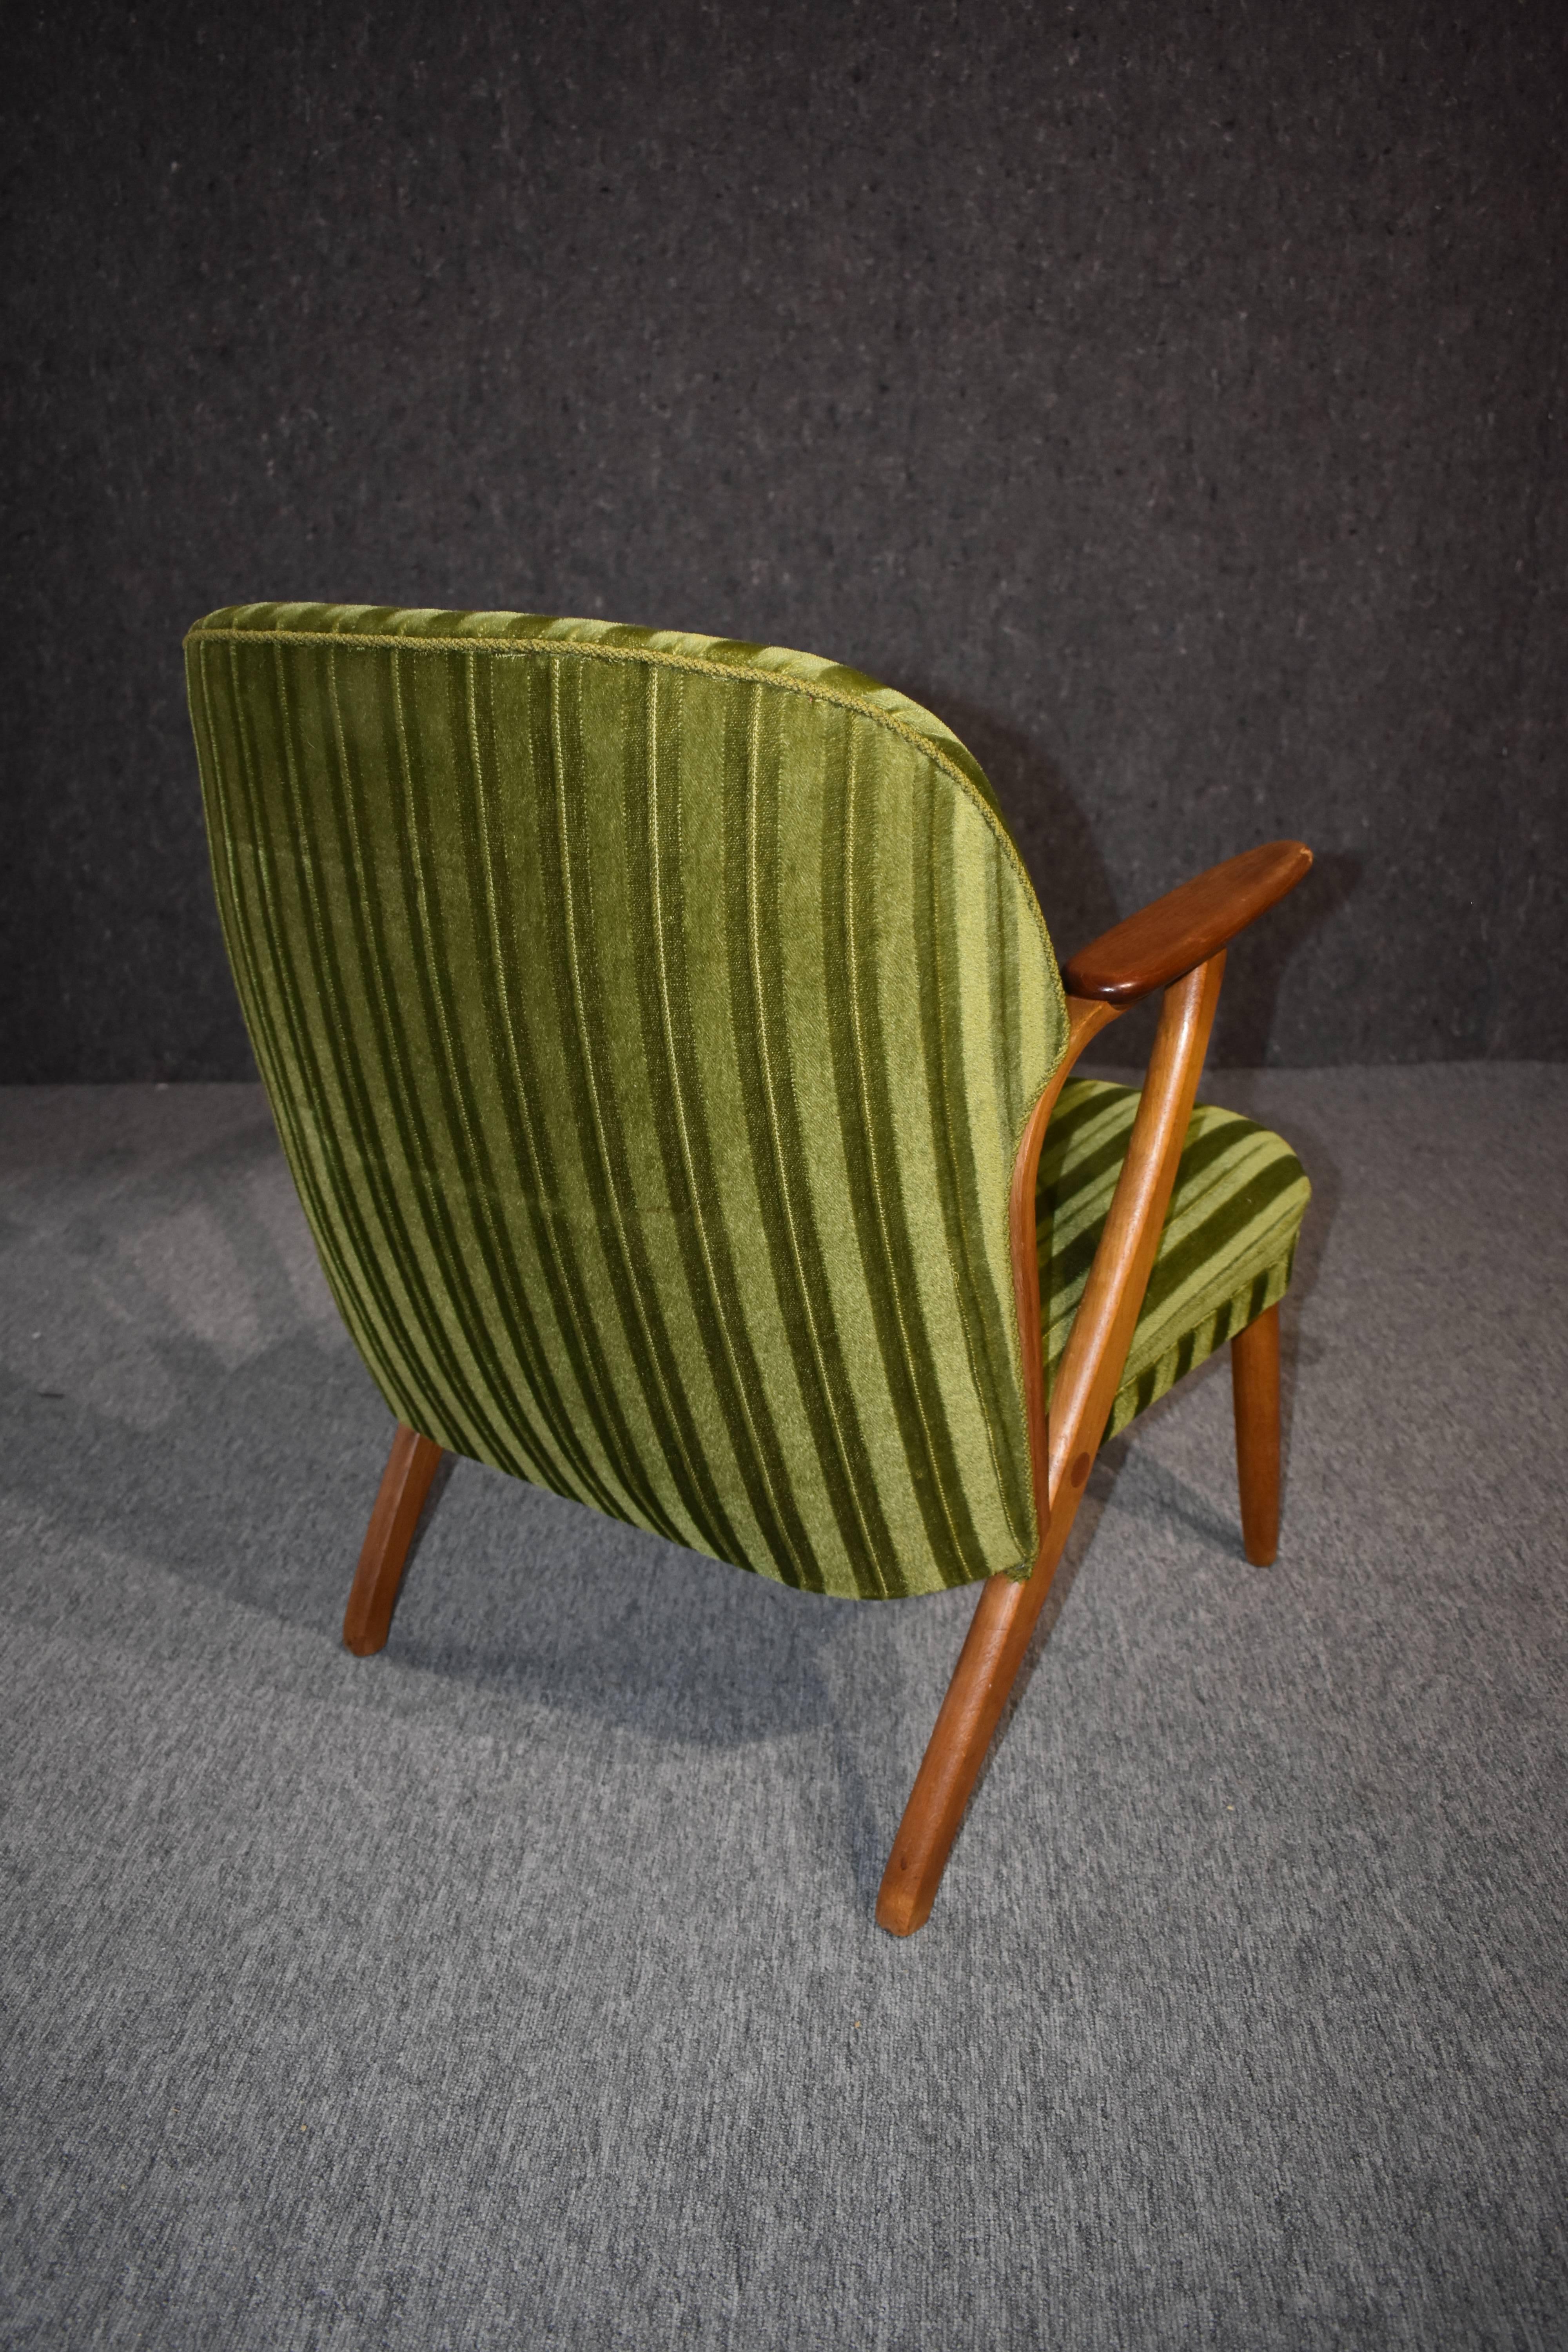 Danish Mid-Century Modern Green Teak Lounge Chair, 1960s In Good Condition For Sale In Odense, DK